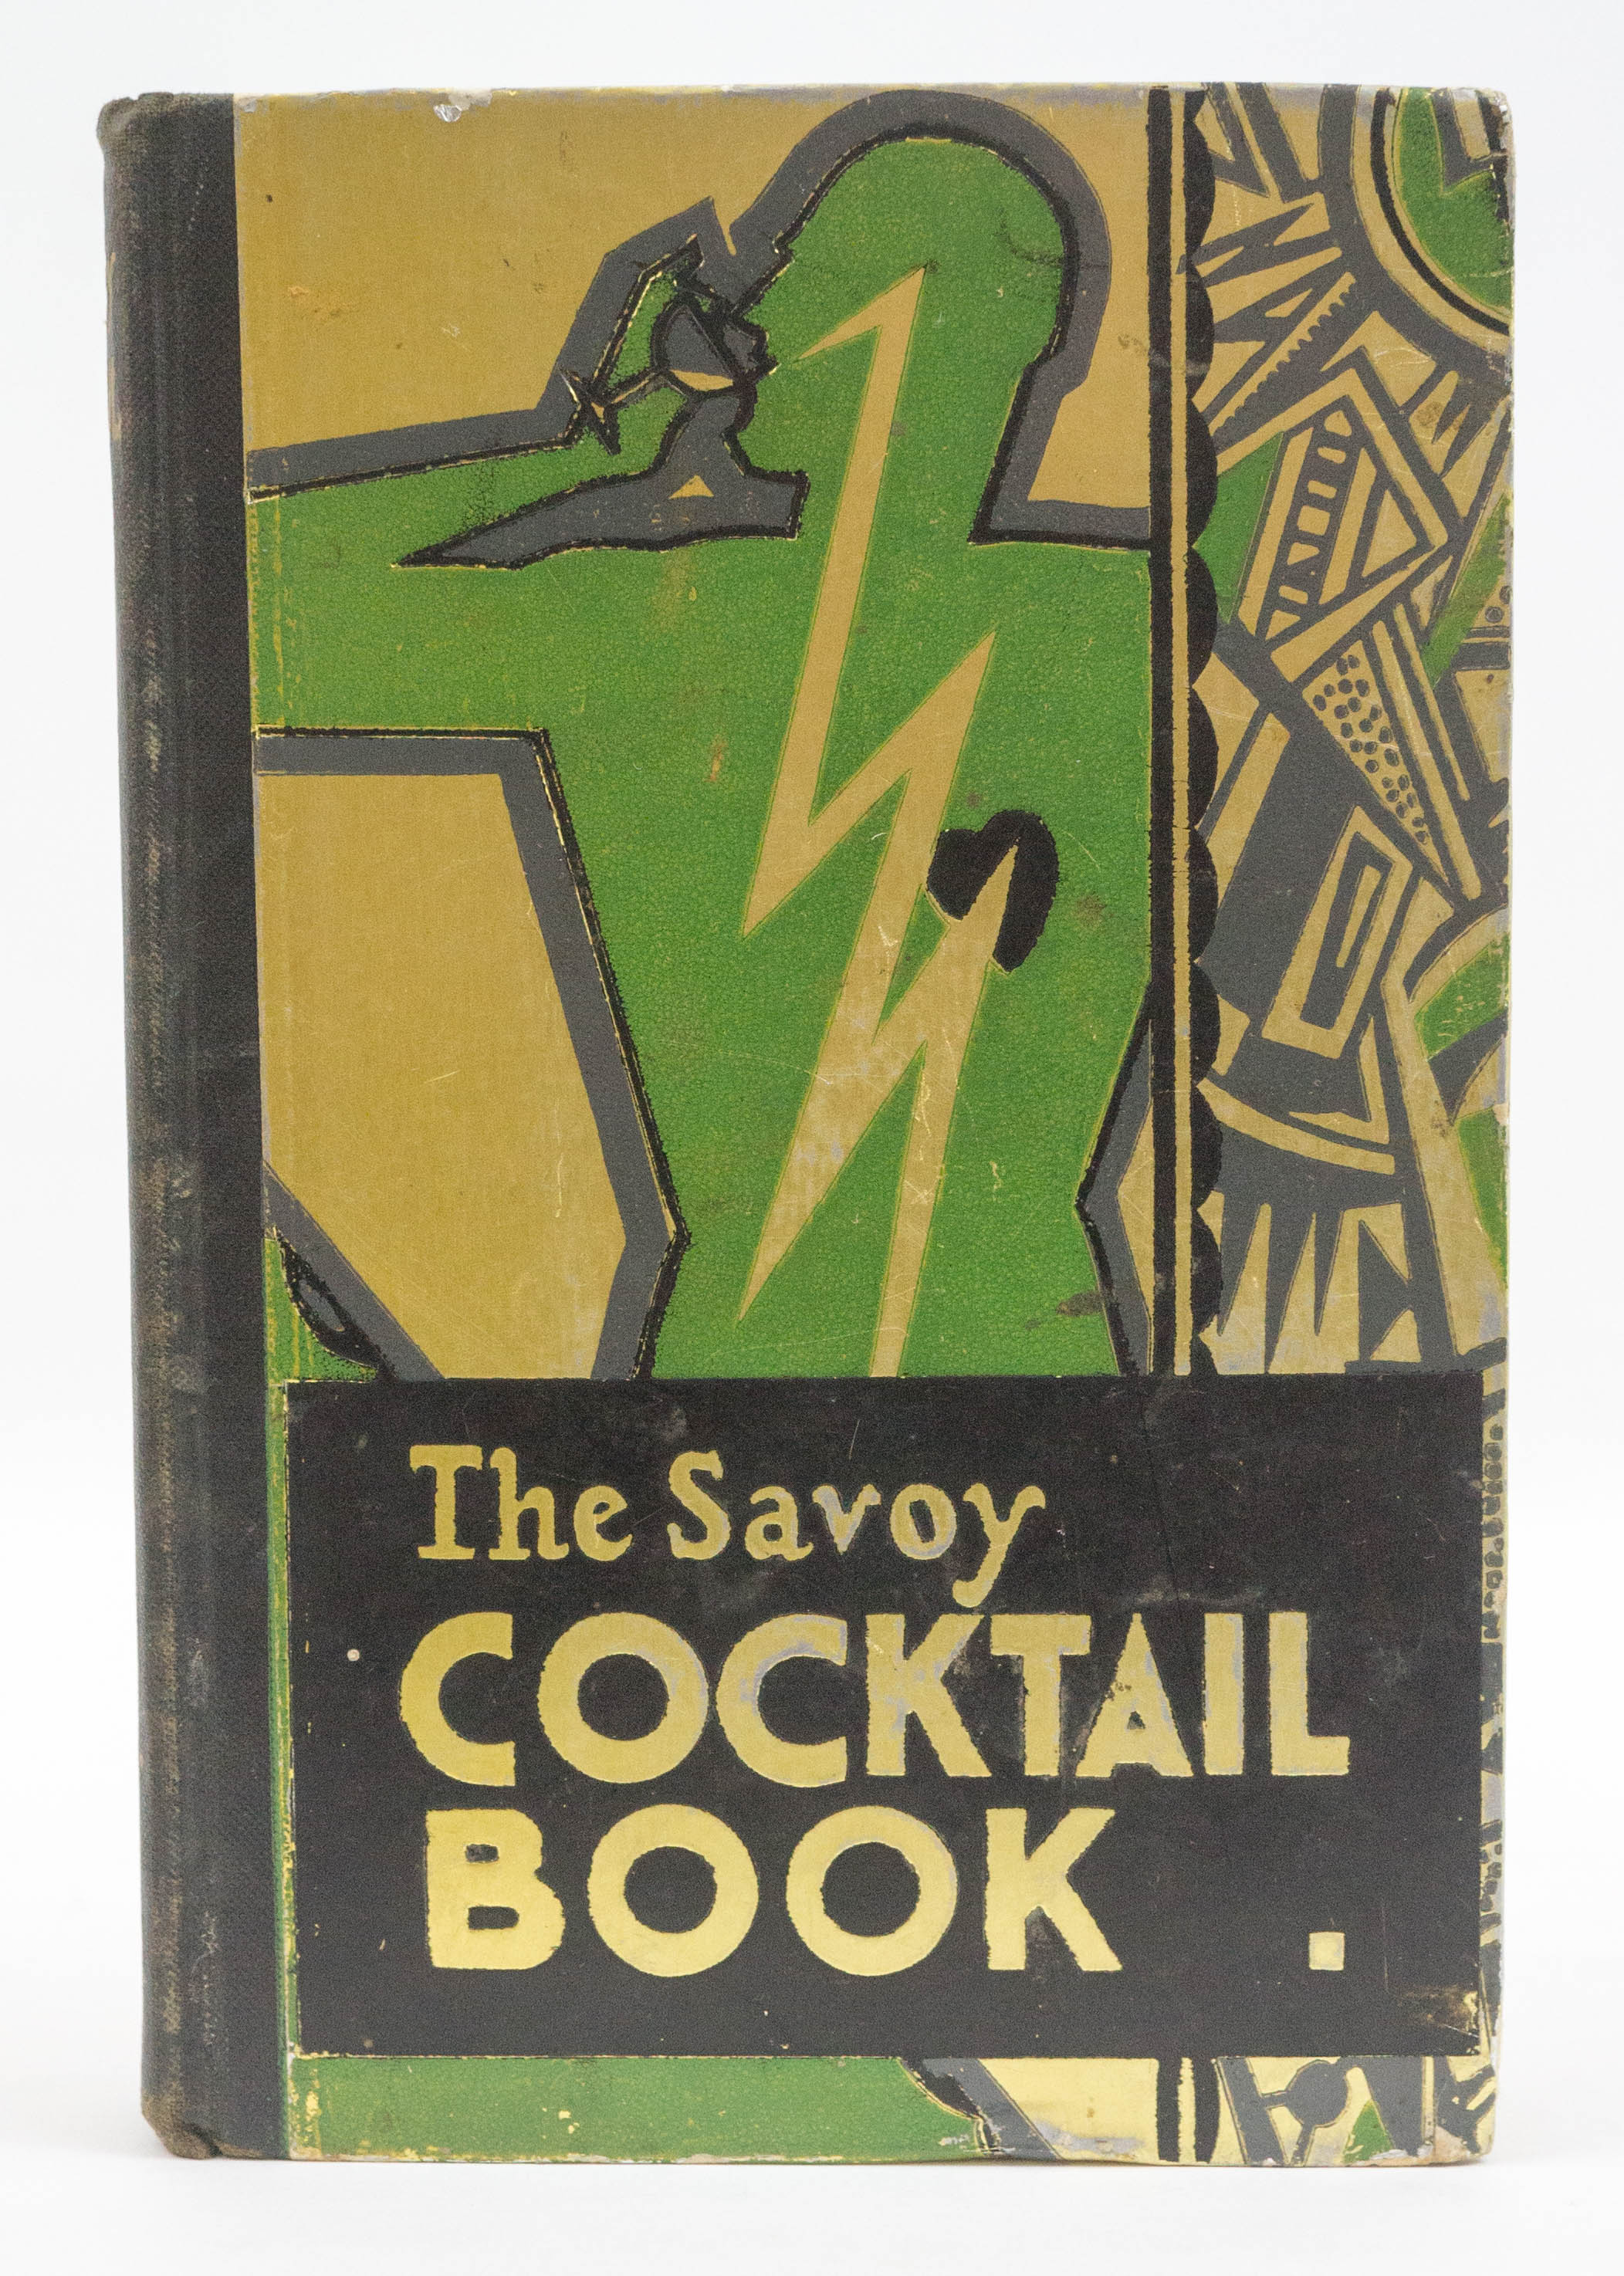 The Savoy Cocktail Book 1st Edition 1st Issue 1930